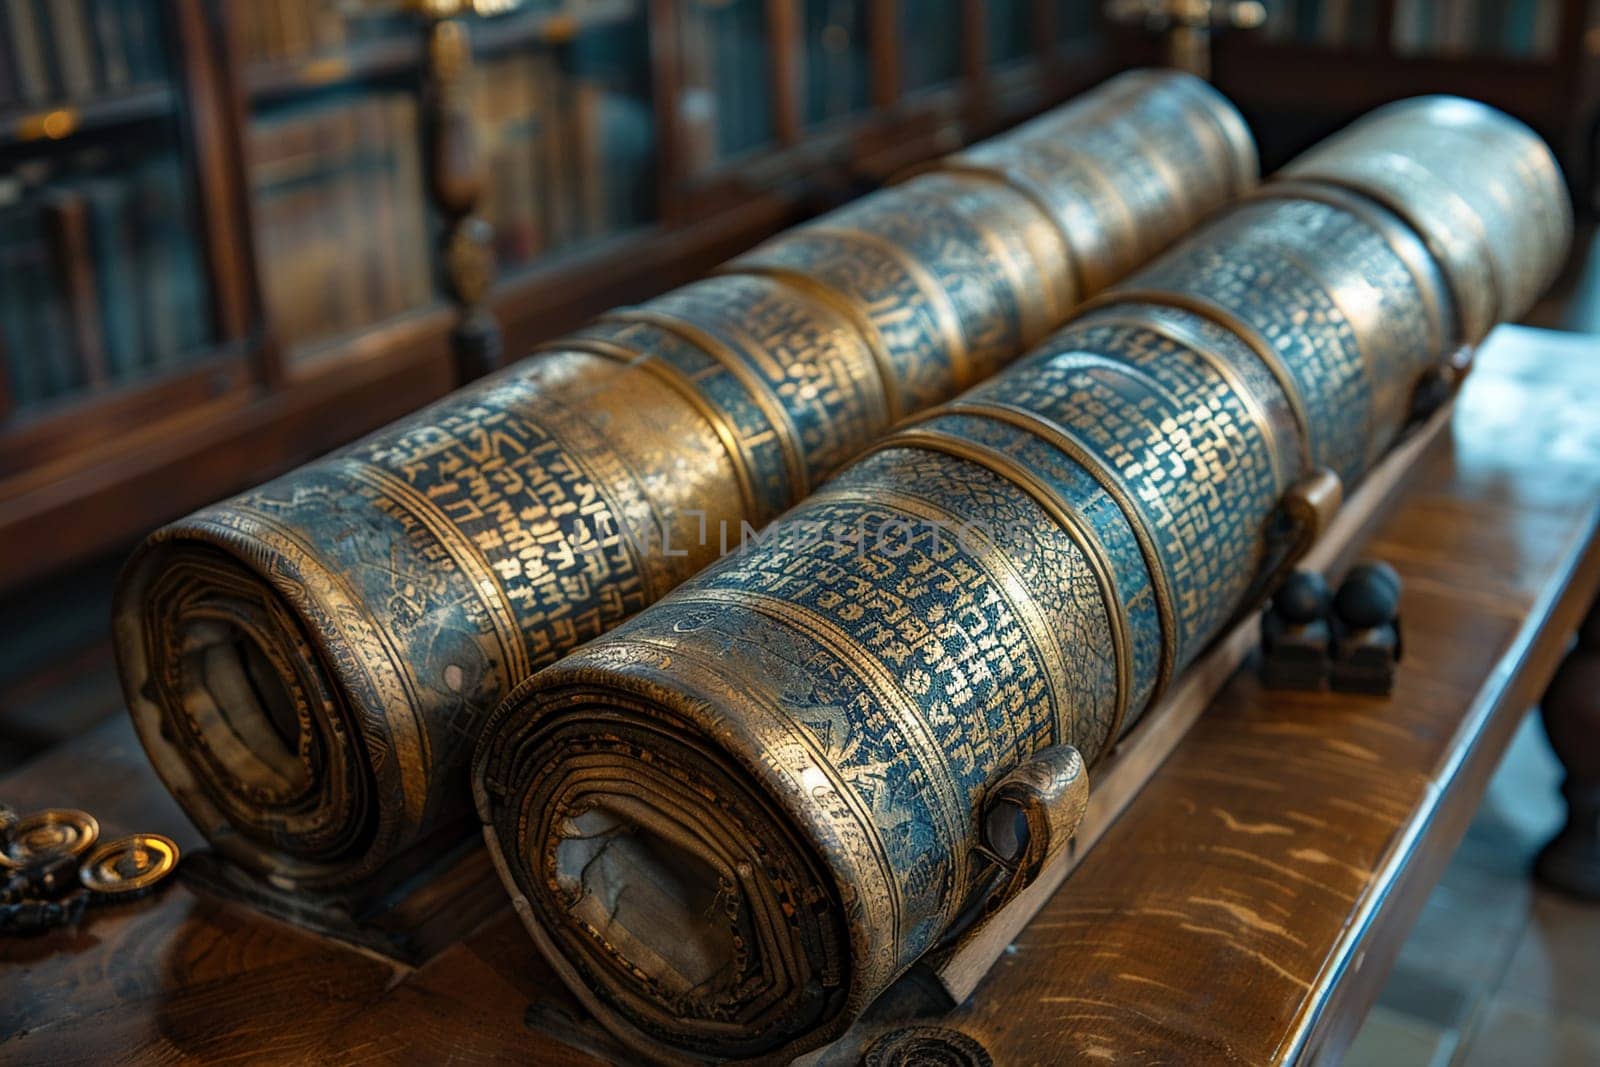 Torah Scrolls Safely Housed in a Softly Lit Ark, The sacred text blurs slightly, emphasizing the reverence and tradition it holds.